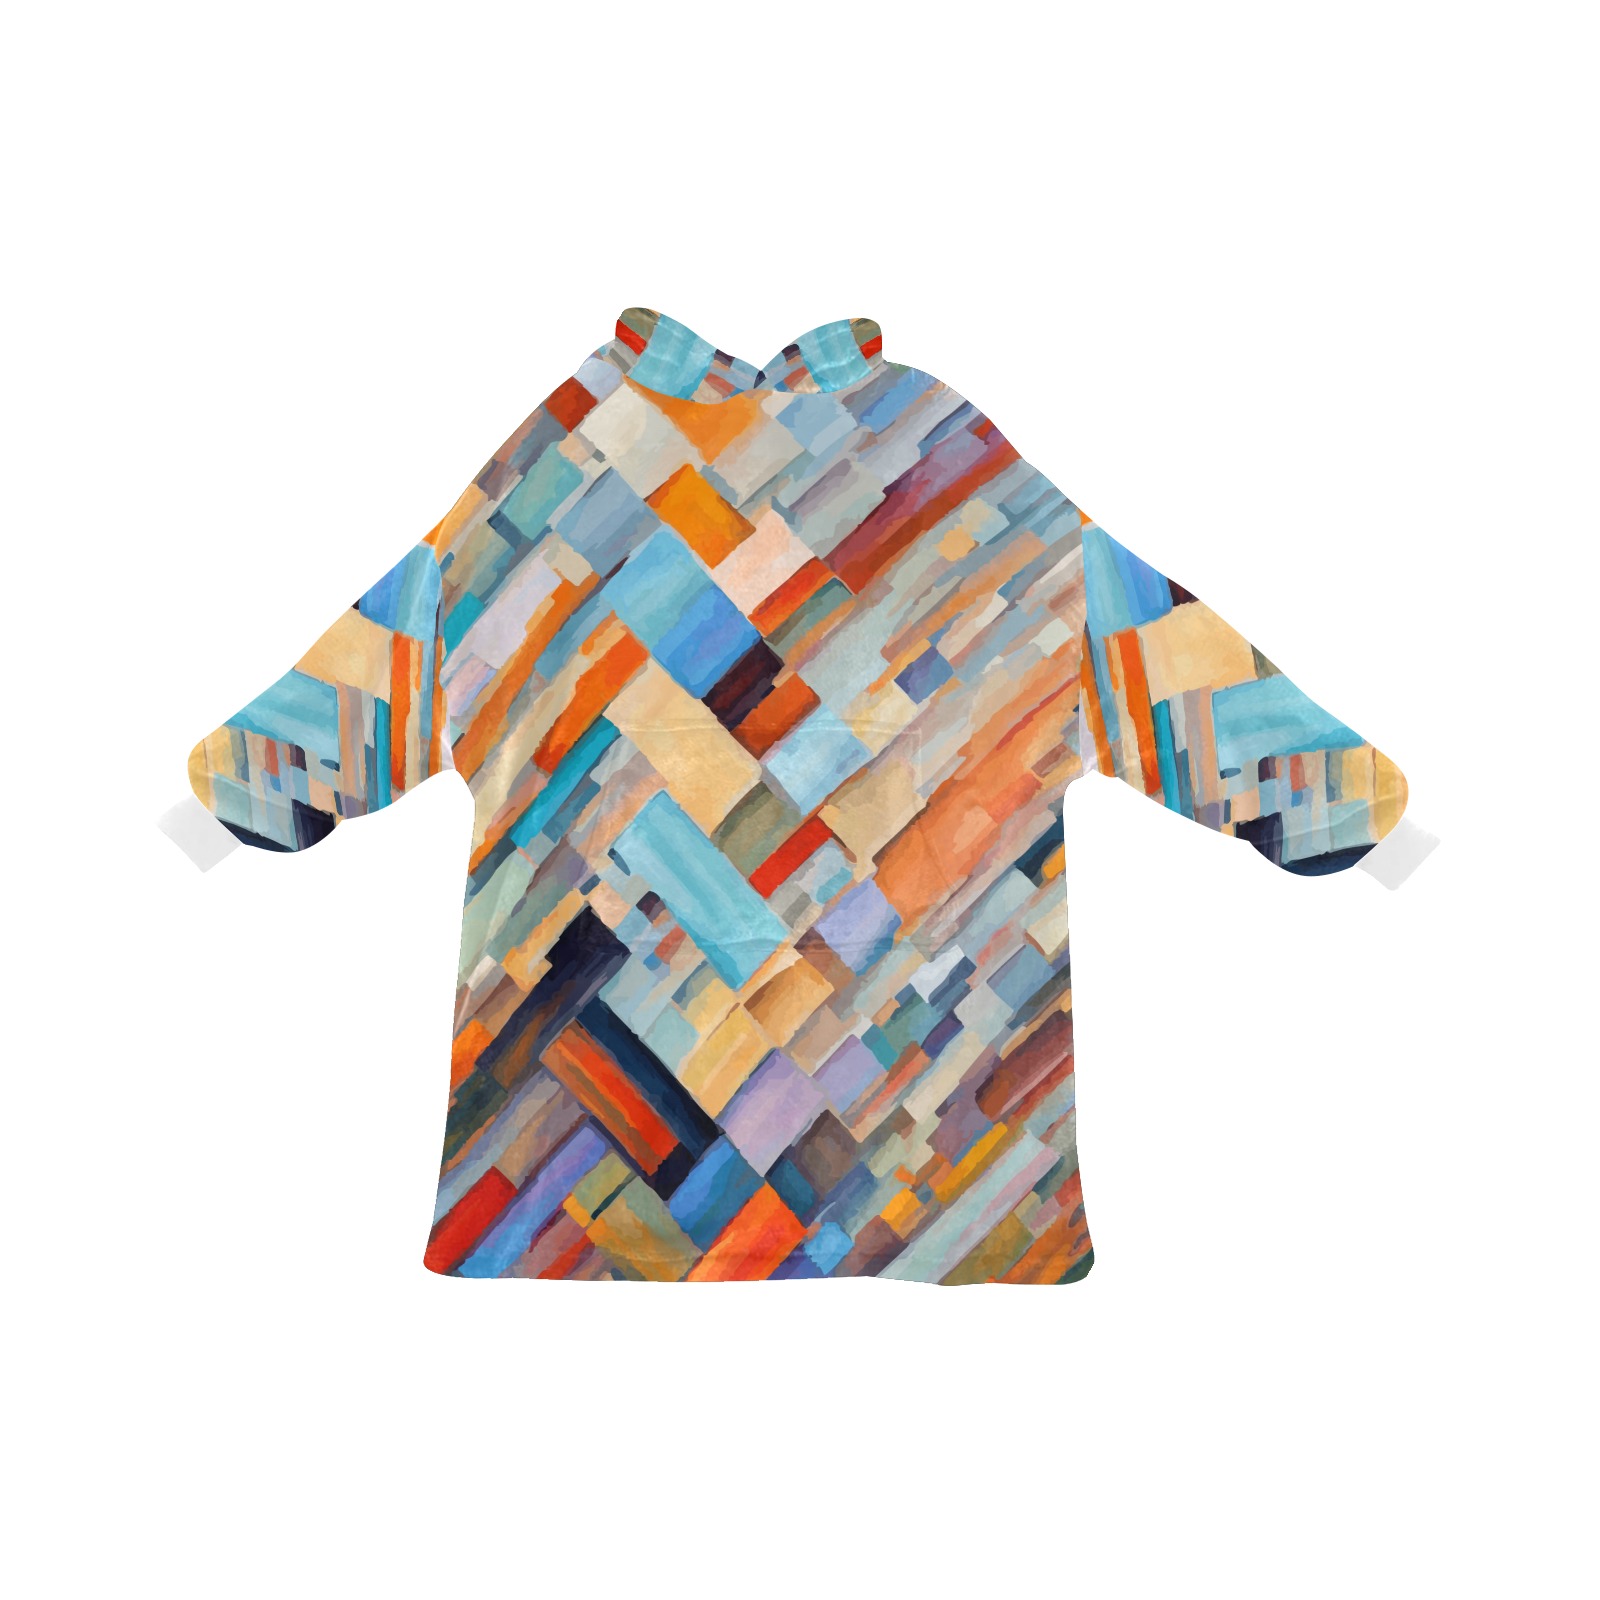 Rectangular patches of many colors abstract art Blanket Hoodie for Men